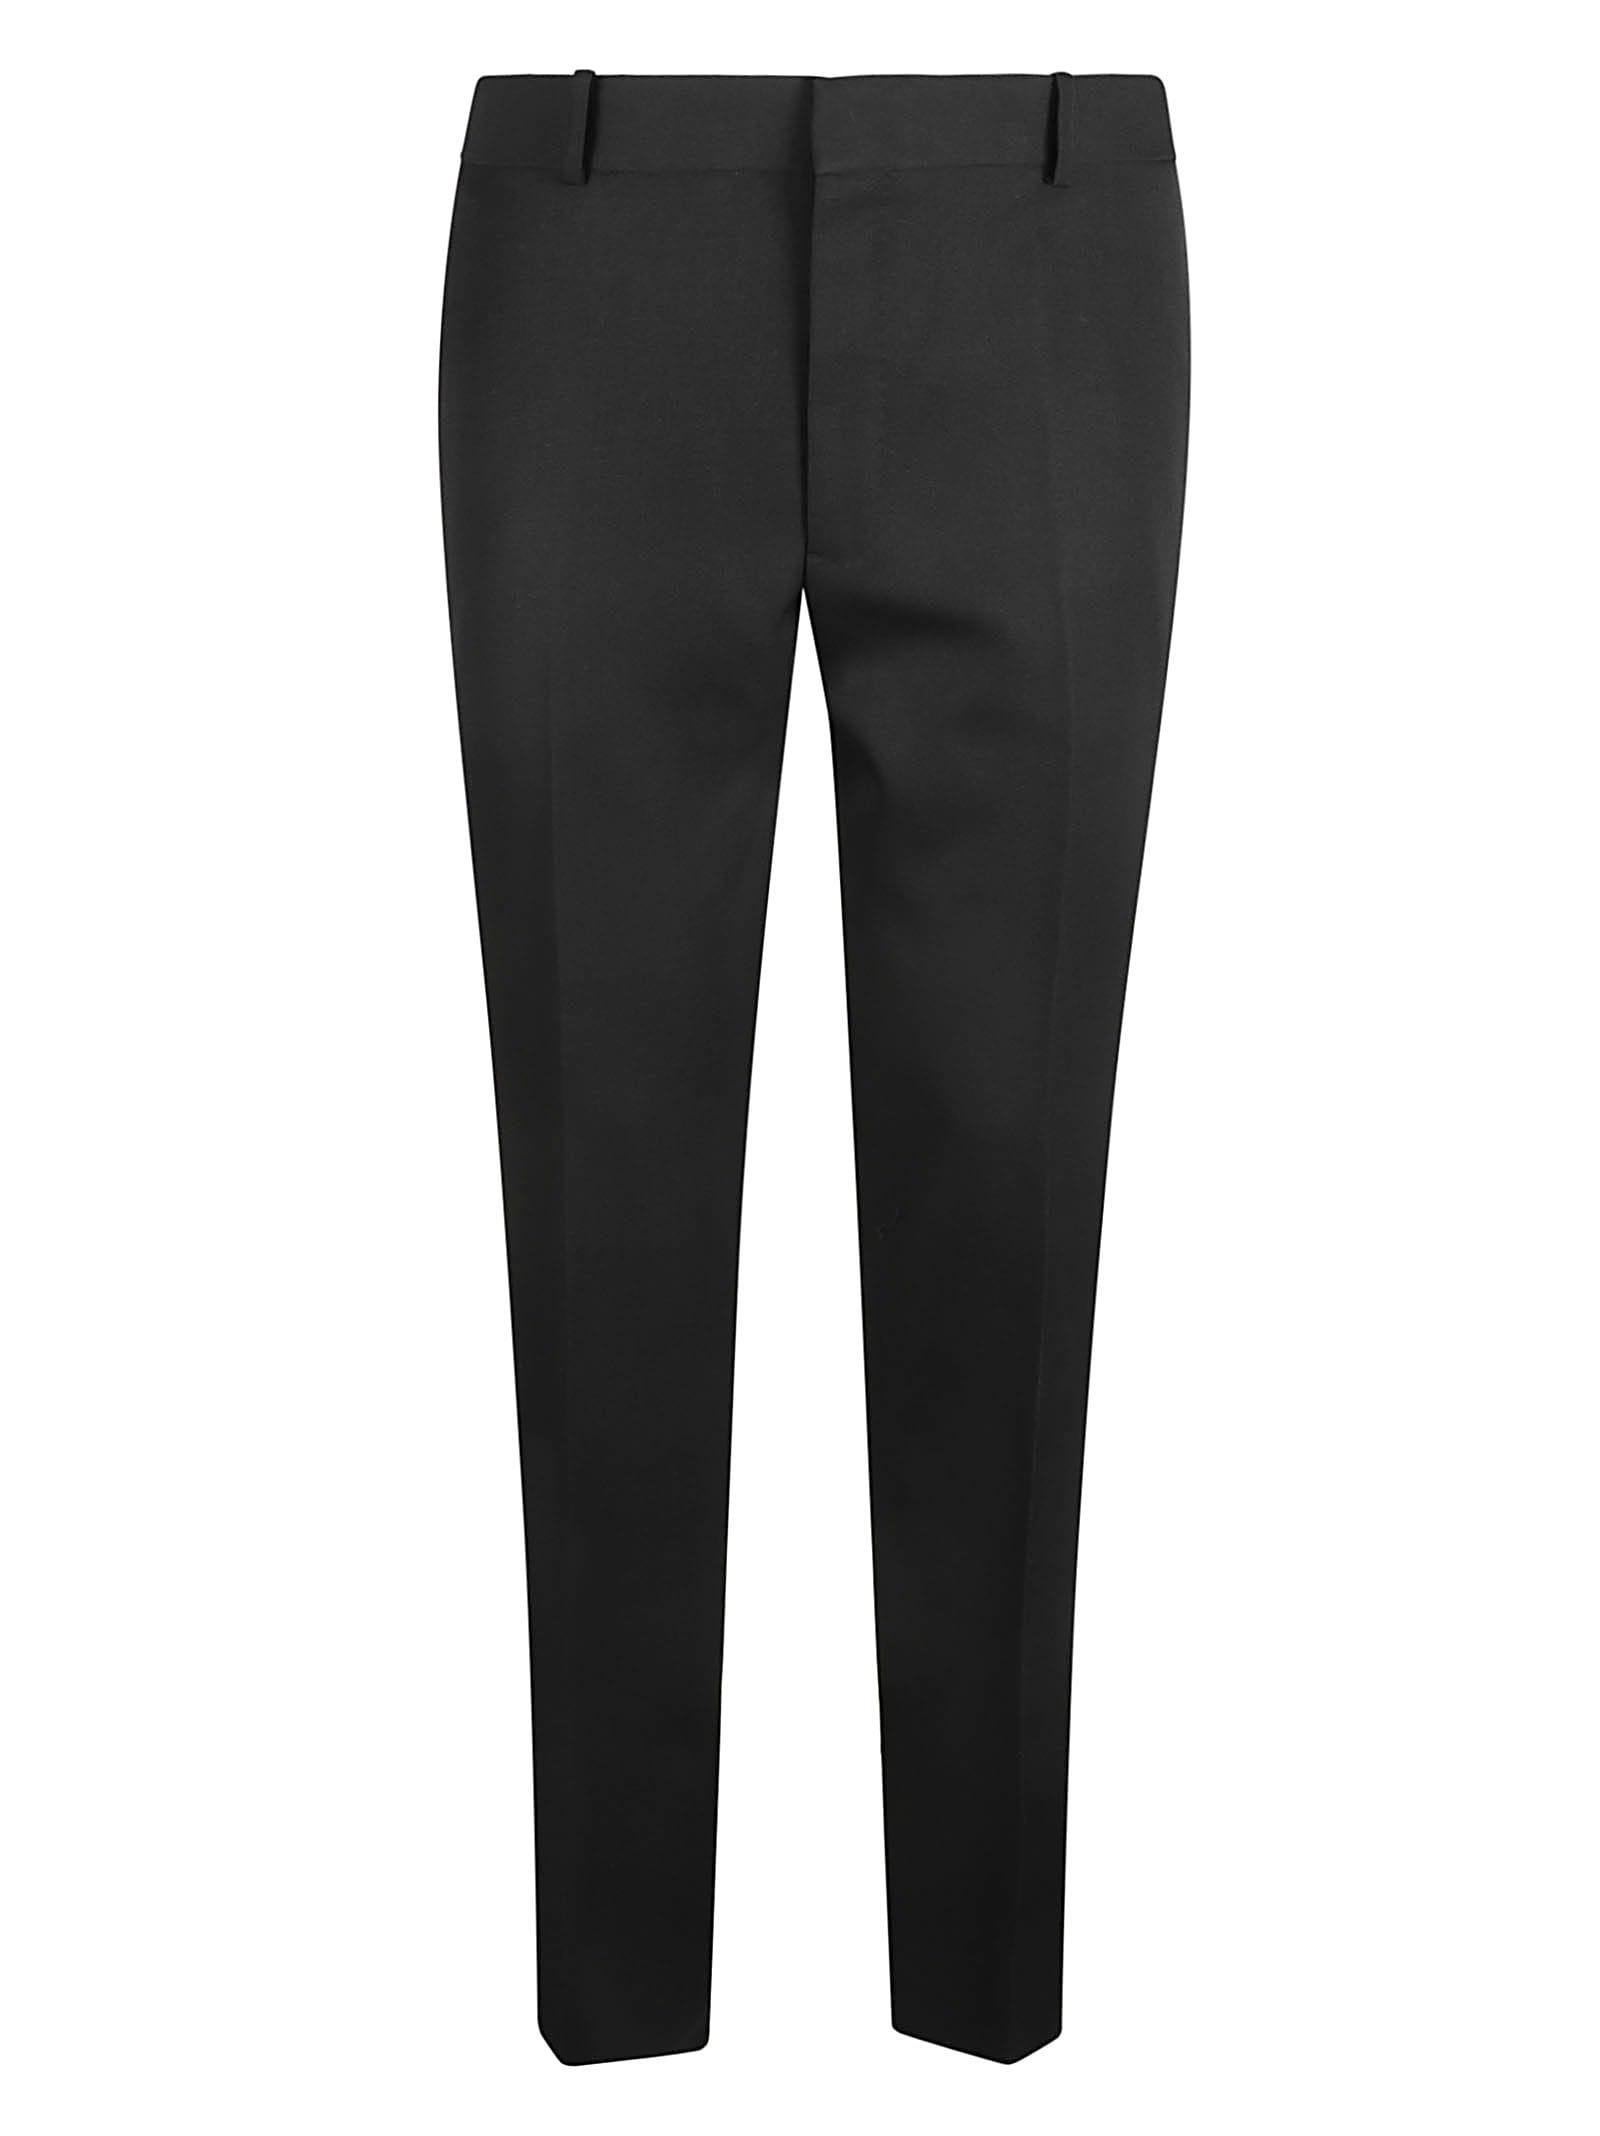 ALEXANDER MCQUEEN CONCEALED CLASSIC TROUSERS